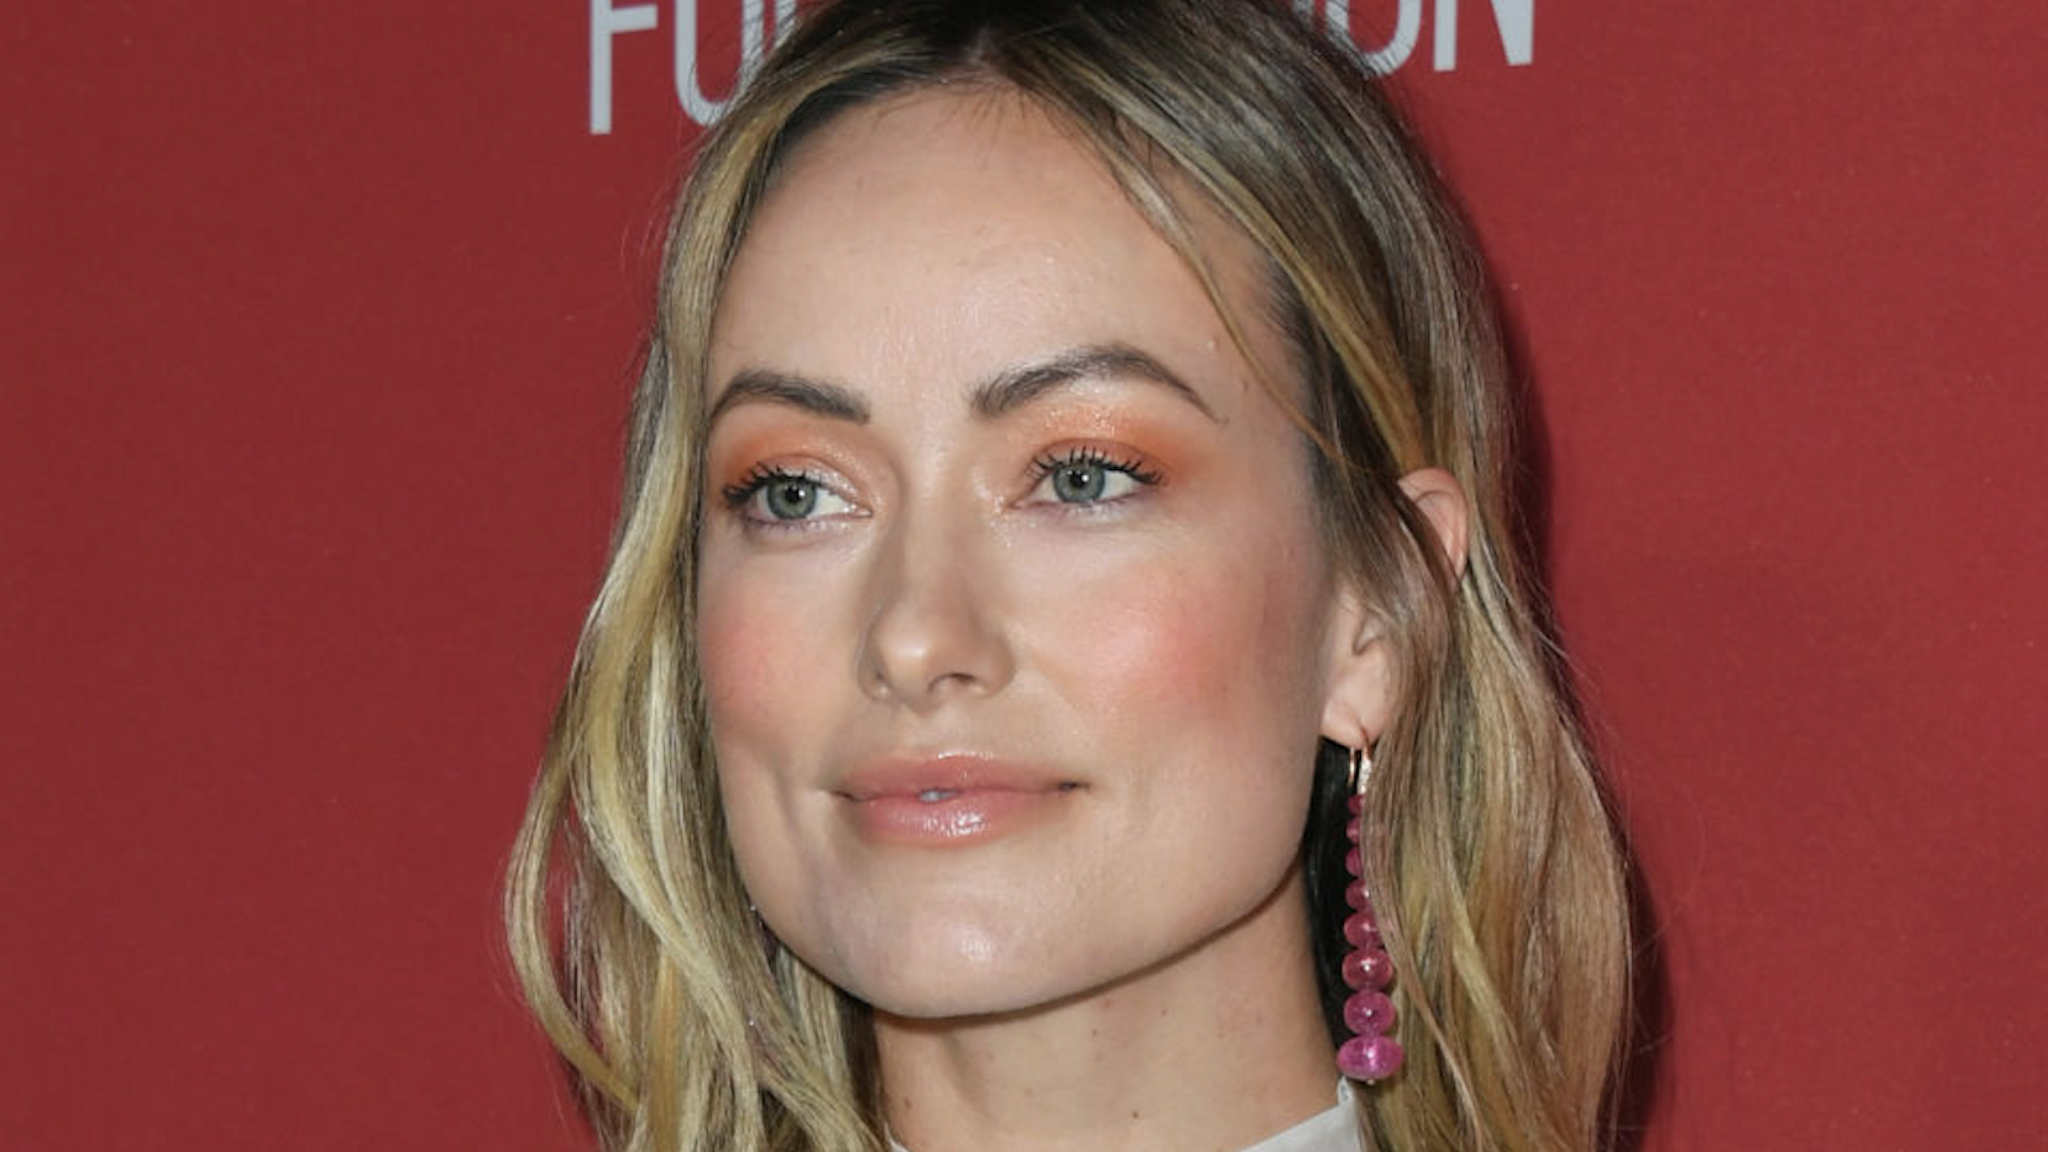 Olivia Wilde attends SAG-AFTRA Foundation's 4th Annual Patron Of The Artists Awards at Wallis Annenberg Center for the Performing Arts on November 07, 2019 in Beverly Hills, California.